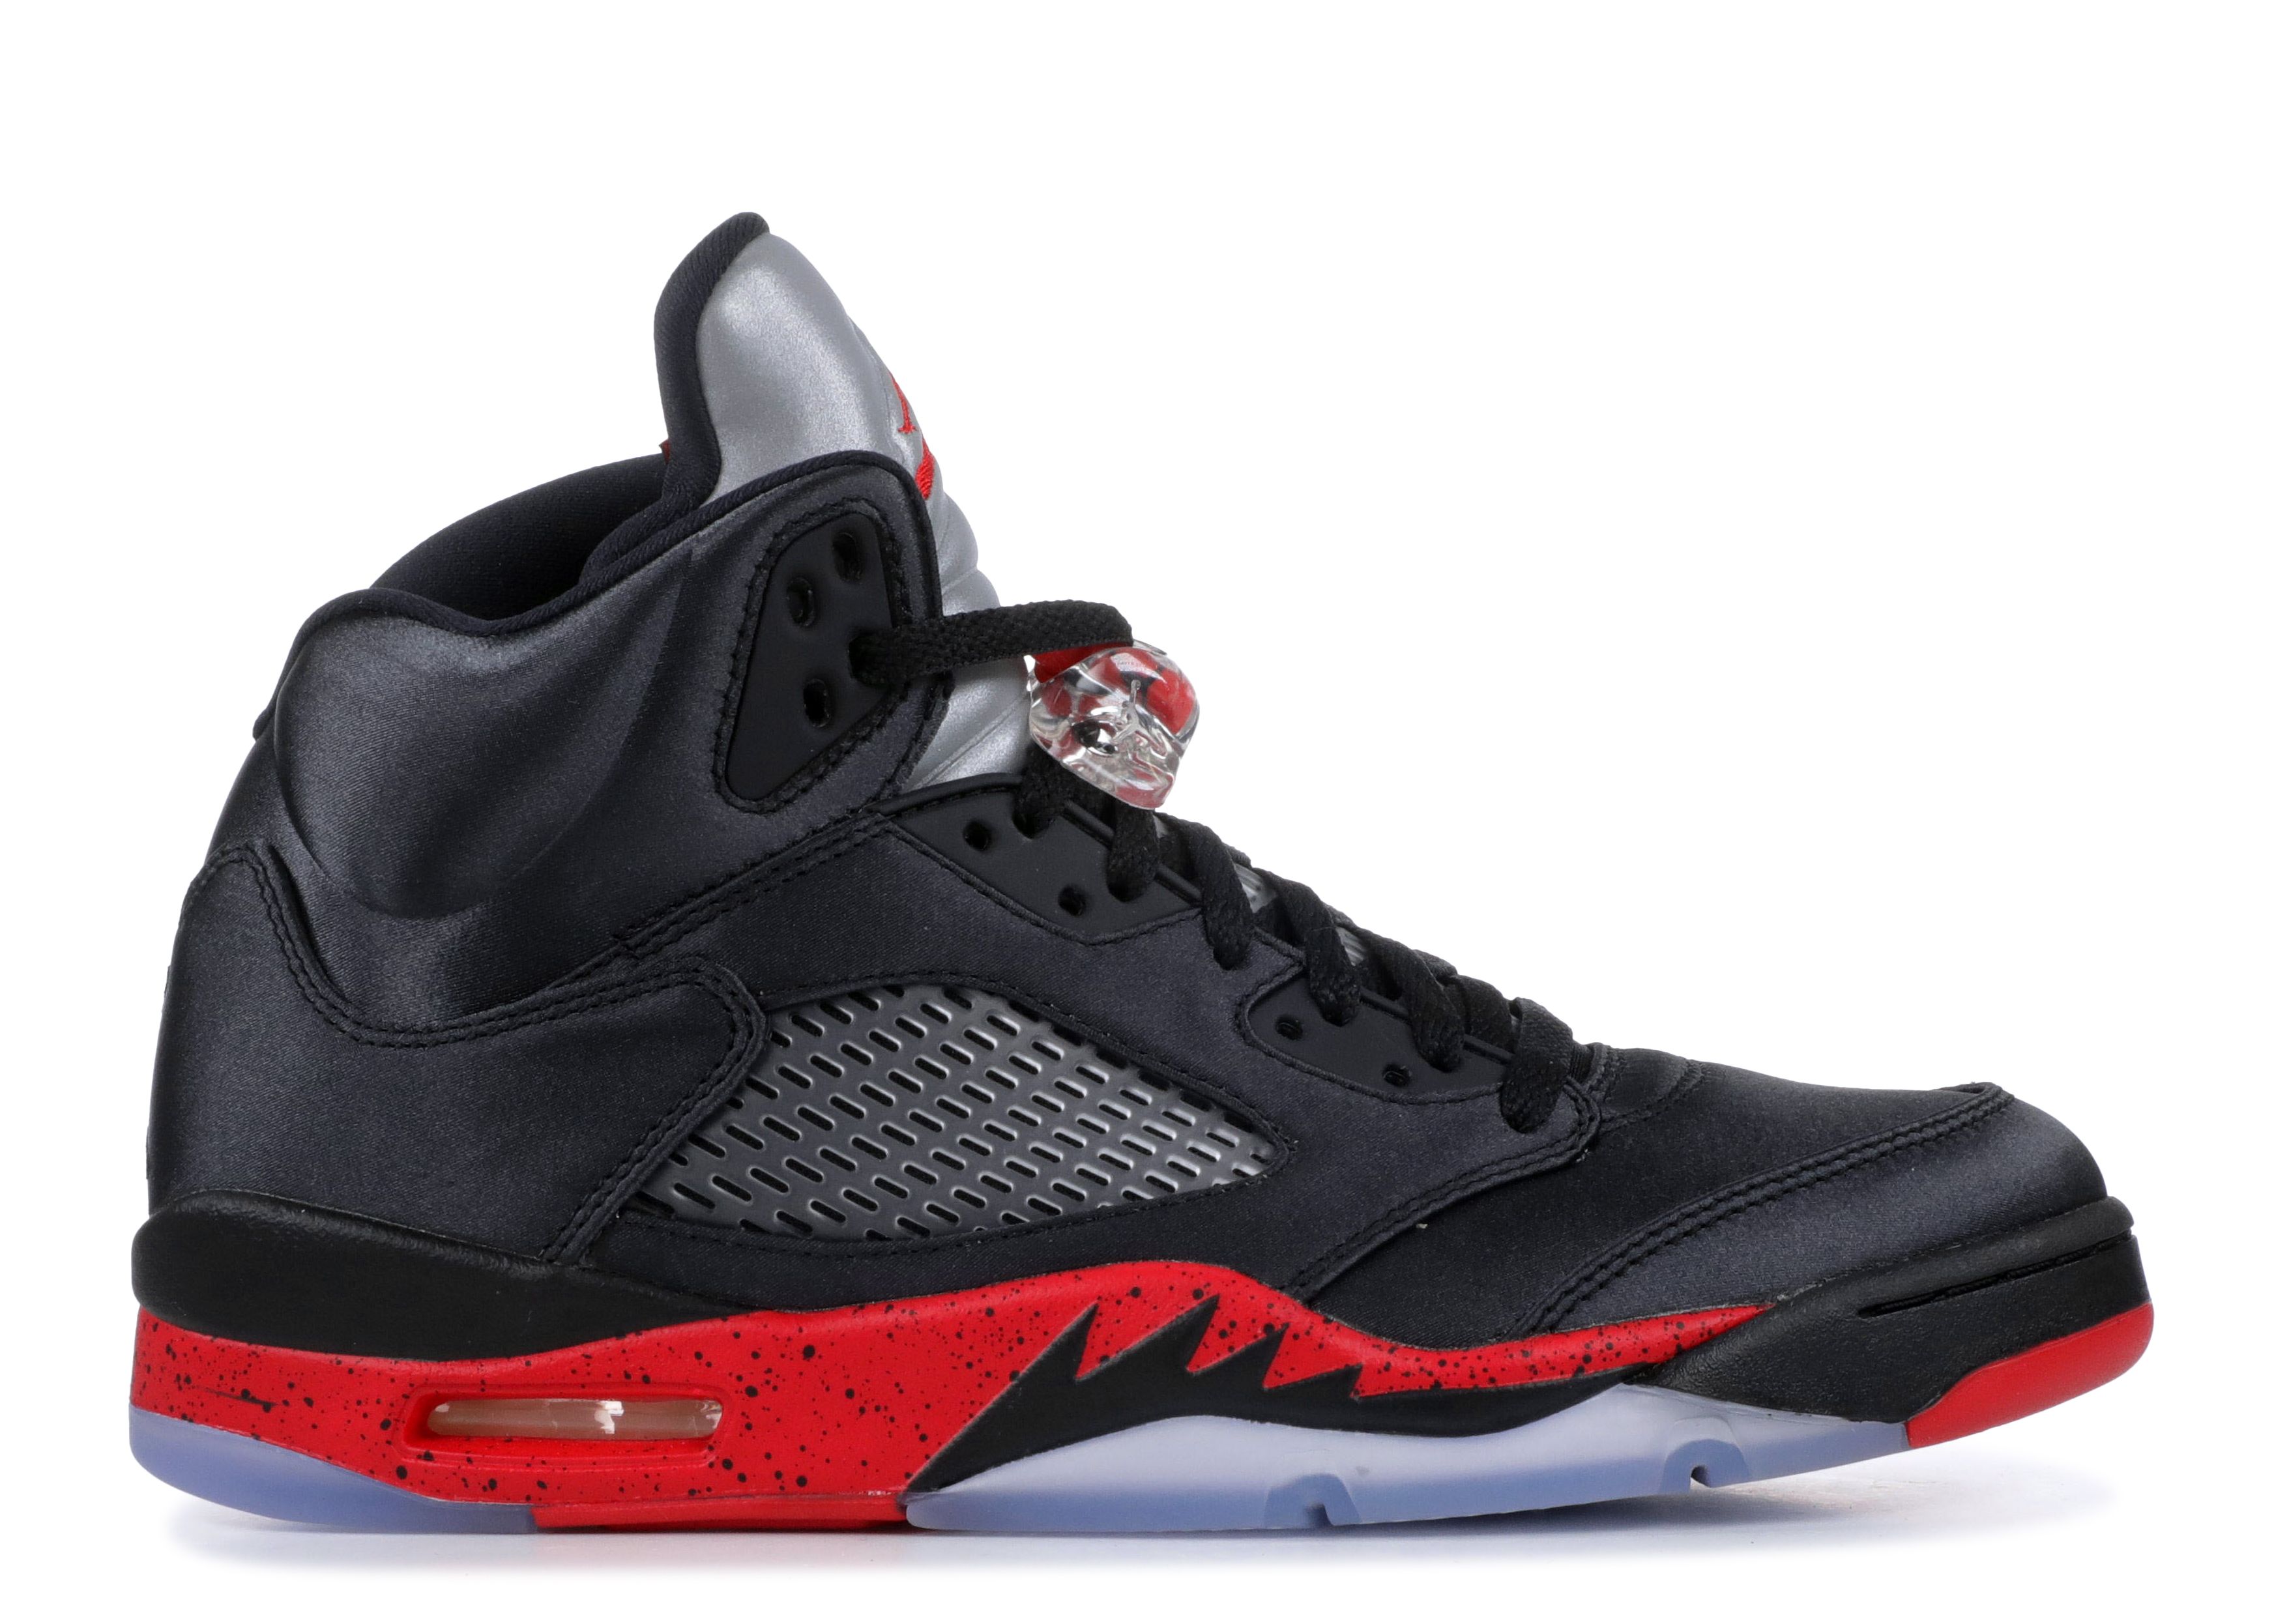 jordan 5s that just came out